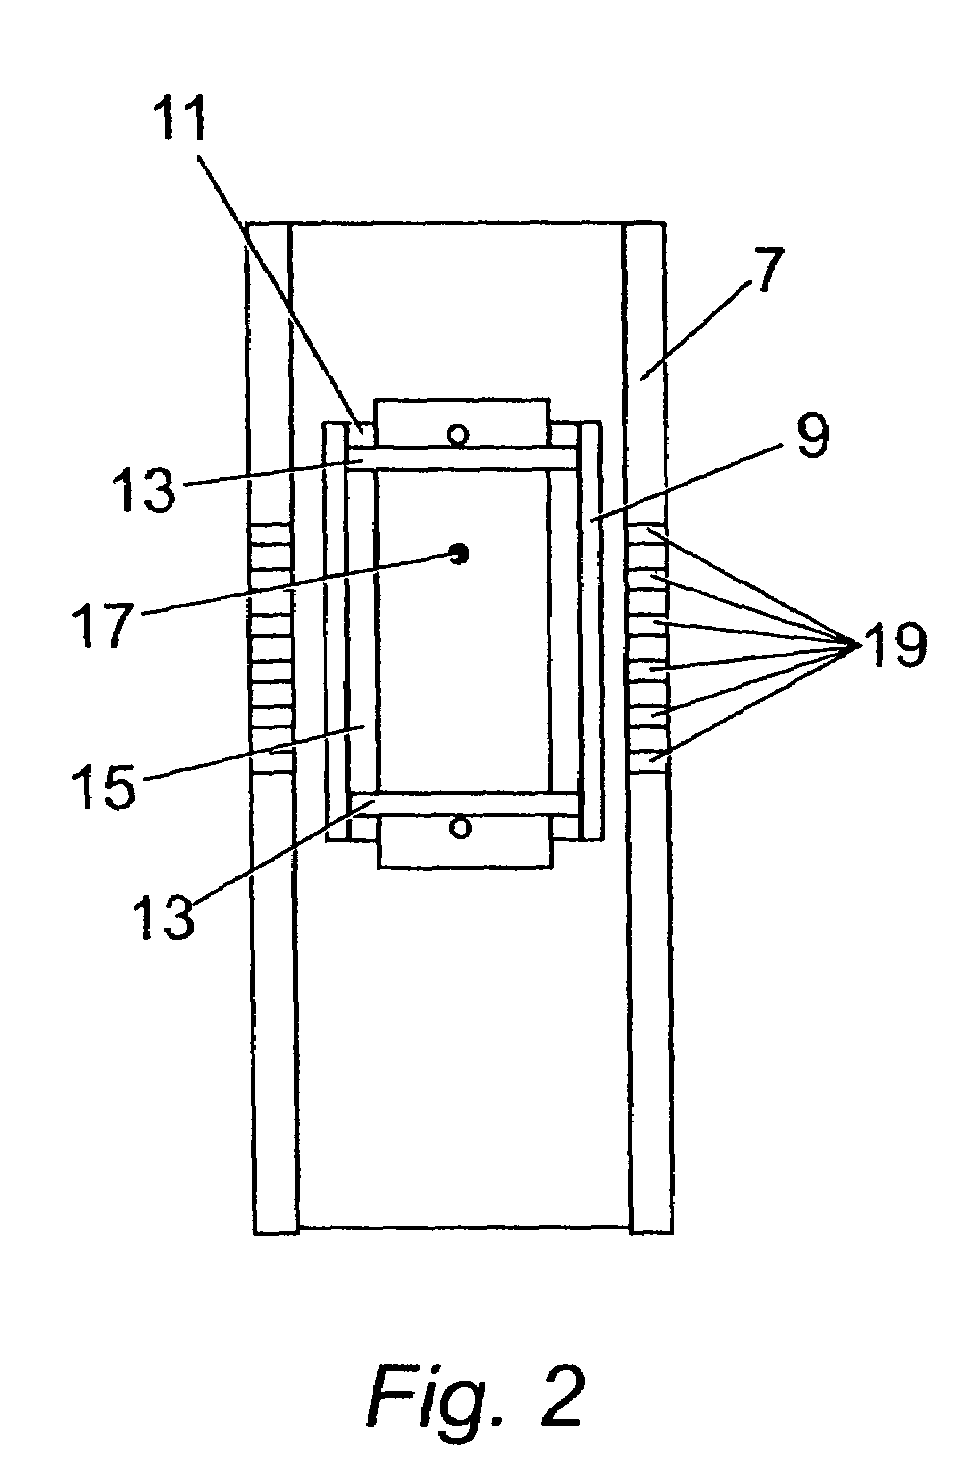 Apparatus and method for expanding and fixing a tubular member within another tubular member, a liner or a borehole